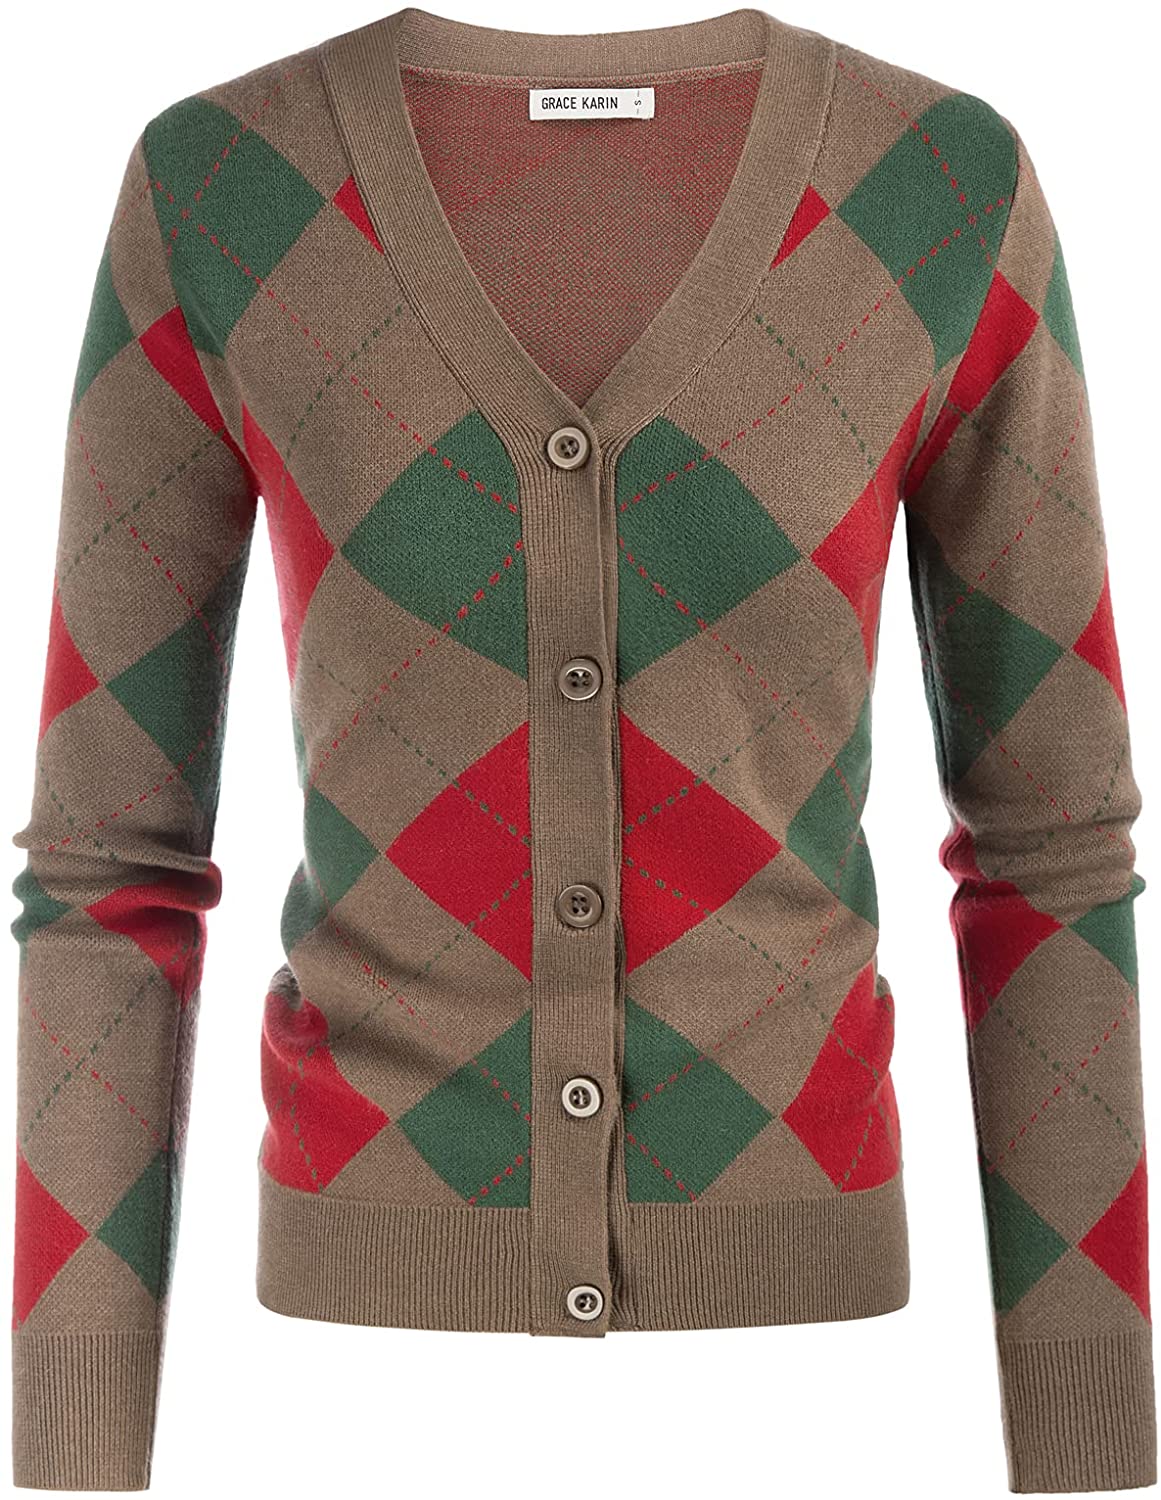 Womens Argyle Preppy Cardigan Sweater Casual V Neck Button Down Knit Cardigan Color Block Shrugs S-2XL 